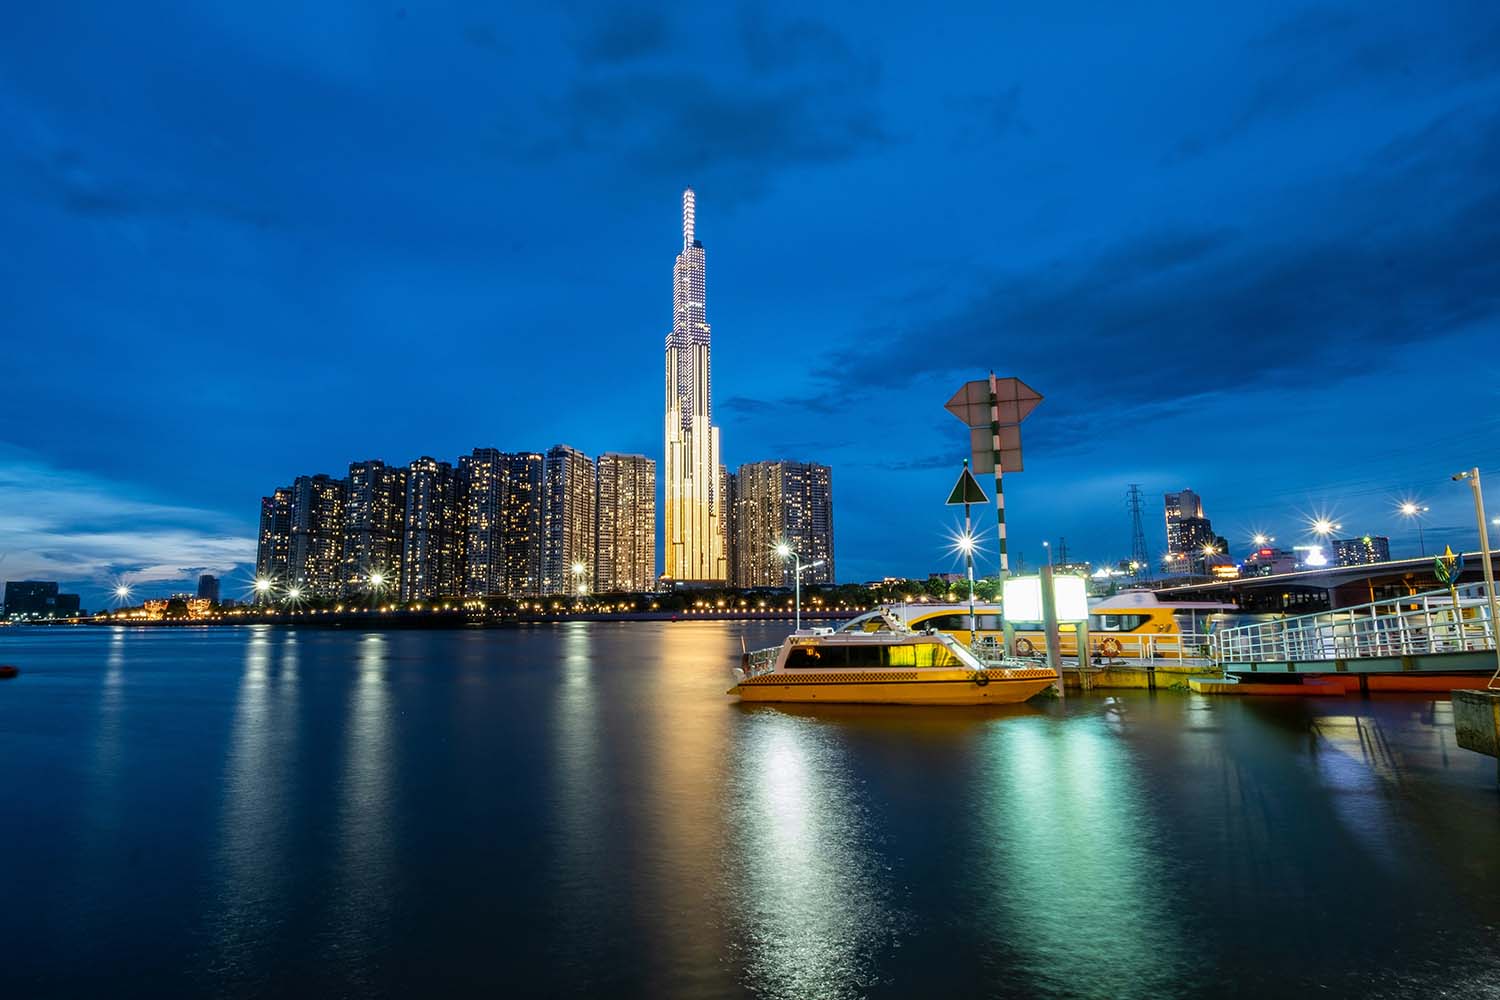 Saigon Waterbus could be a promising addition to the city's transportation and tourism (image: Unsplash).